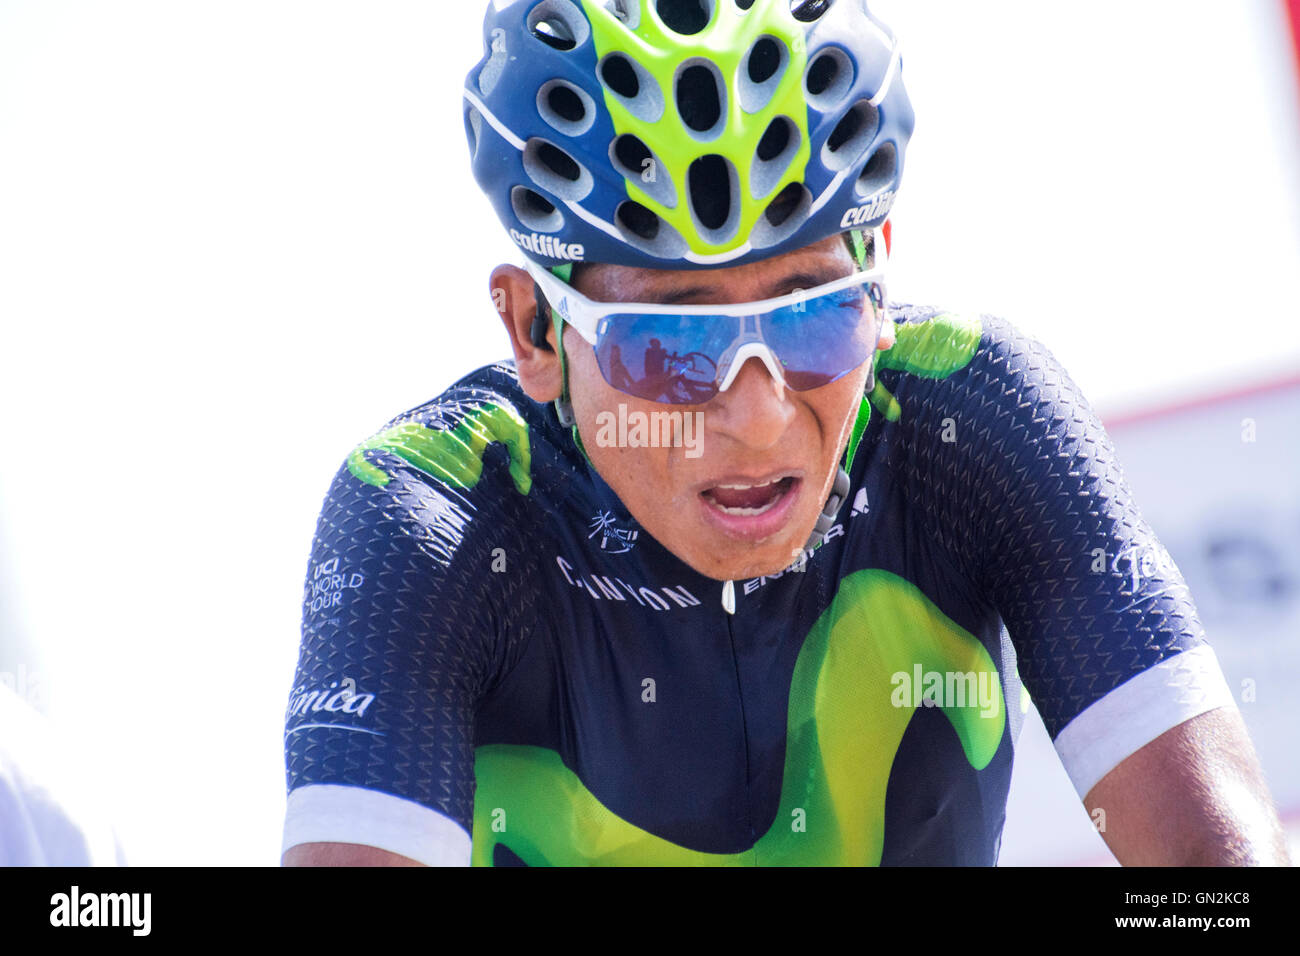 La Camperona, Spain. 27th August, 2016. Nairo Quintana (Movistar Team) finishes the 8th stage of cycling race ‘La Vuelta a España’ (Tour of Spain) between Villalpando and Climb of La Camperona on August 27, 2016 in Leon, Spain. Credit: David Gato/Alamy Live News Stock Photo